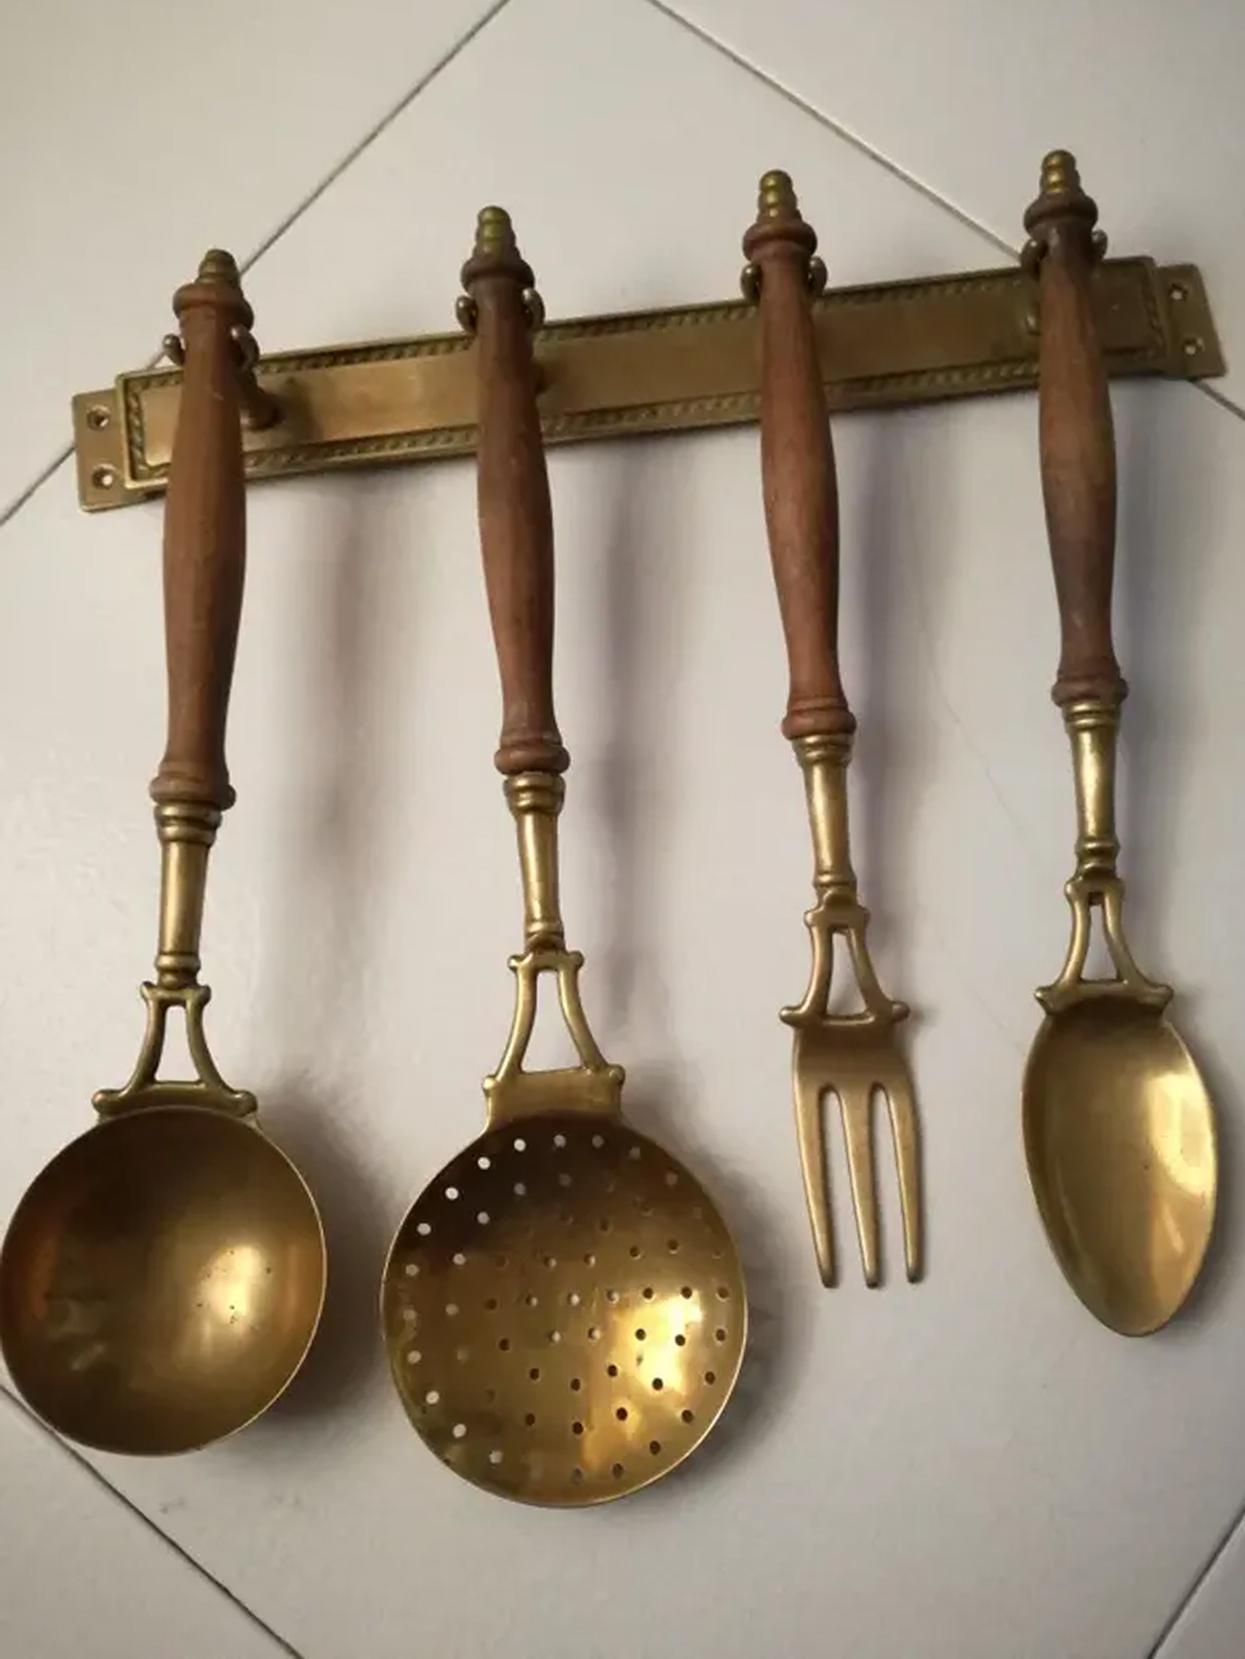 Art Nouveau Old Kitchen Utensils Made of Brass with Hanging Bar, Early 20th Century